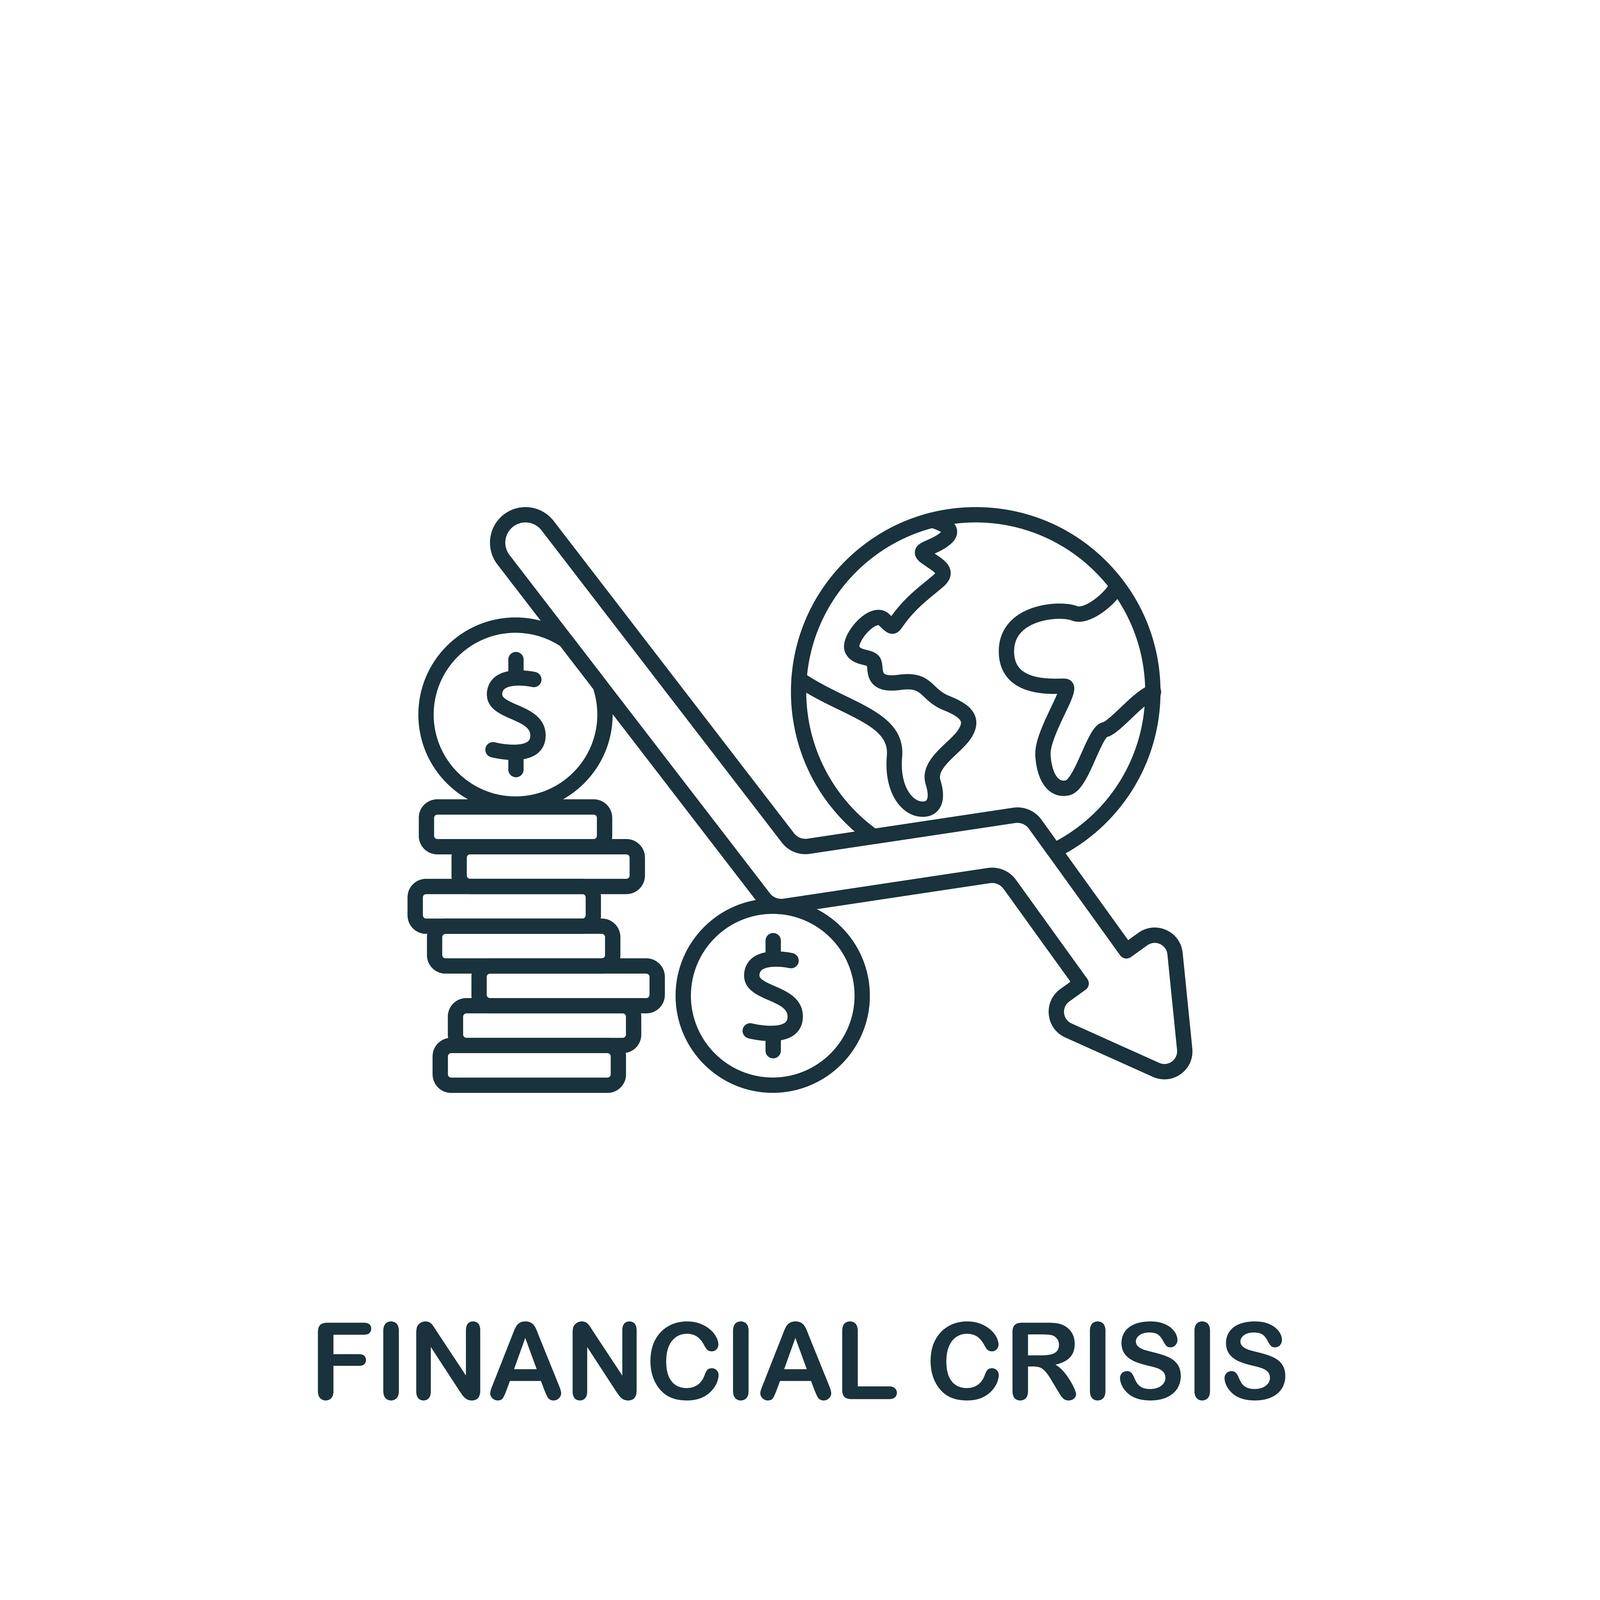 Financial Crisis icon. Monochrome simple line Economic Crisis icon for templates, web design and infographics by simakovavector